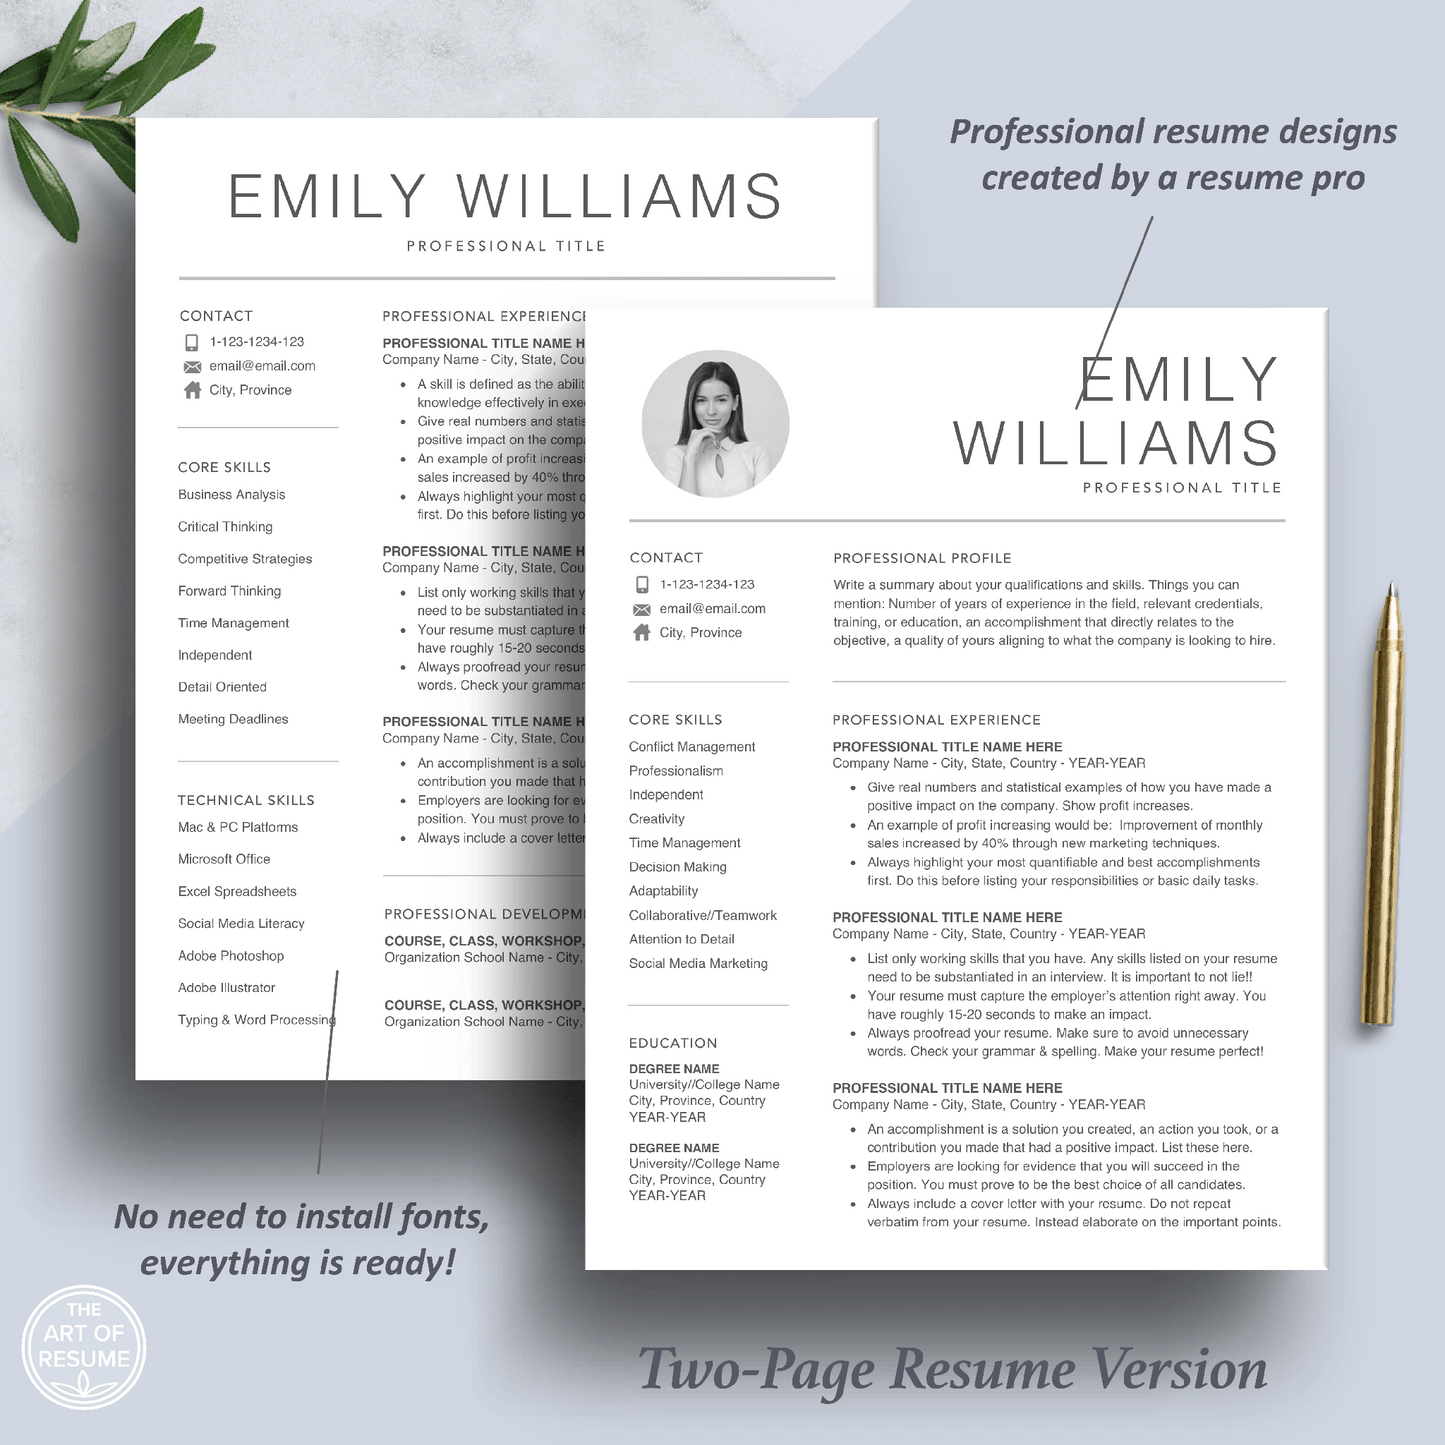 Resume Design with Photo | Executive Resume Design | Cover Letter